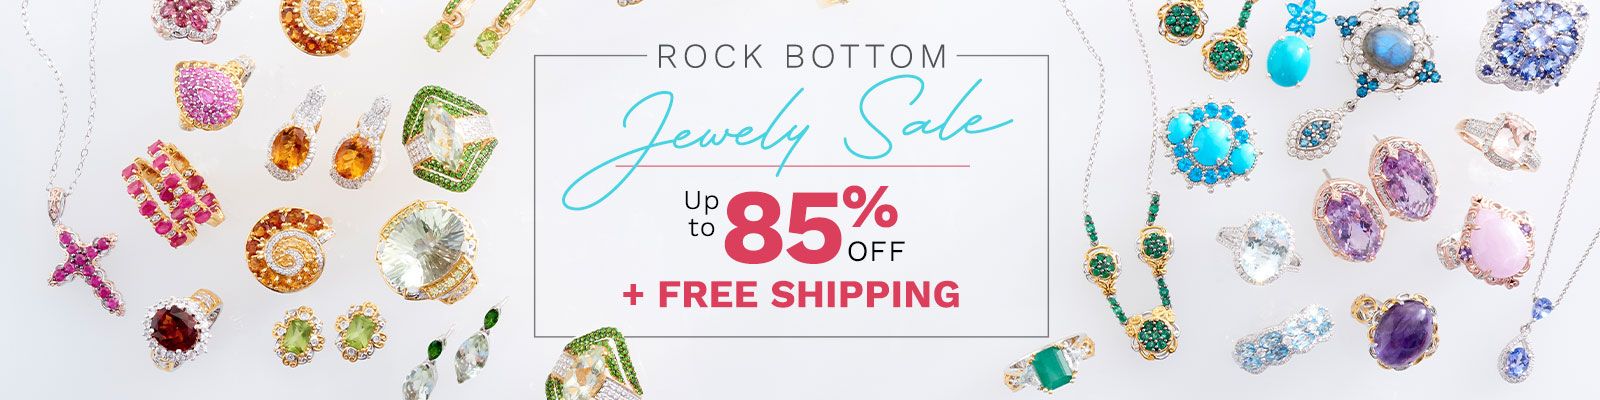 Rock Bottom Jewelry Sale  Up to 85% Off + Free Shipping